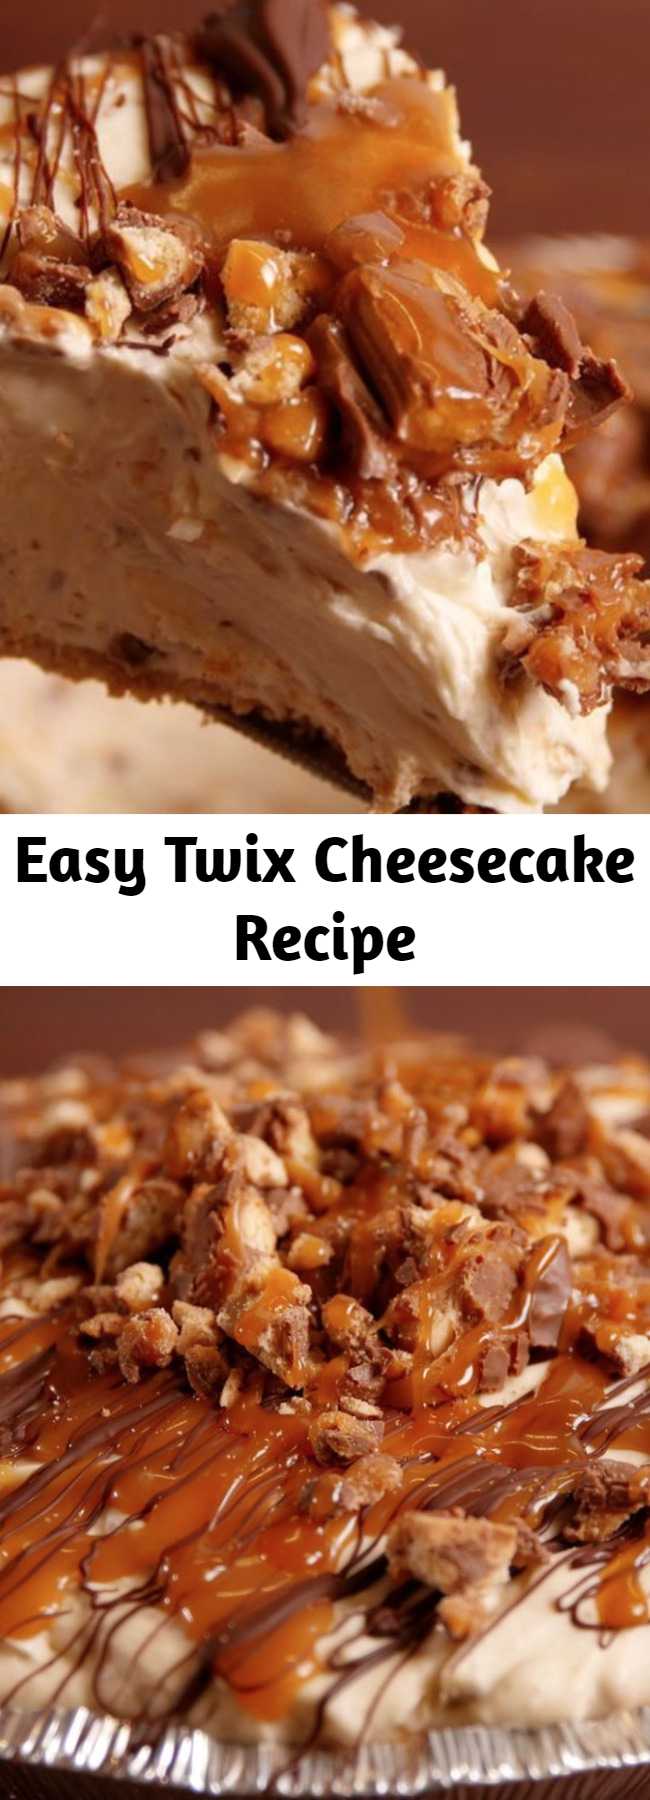 Easy Twix Cheesecake Recipe - Upgrade your cheesecake game with this easy recipe for Twix cheesecake. This cheesecake is a real crowd pleaser.